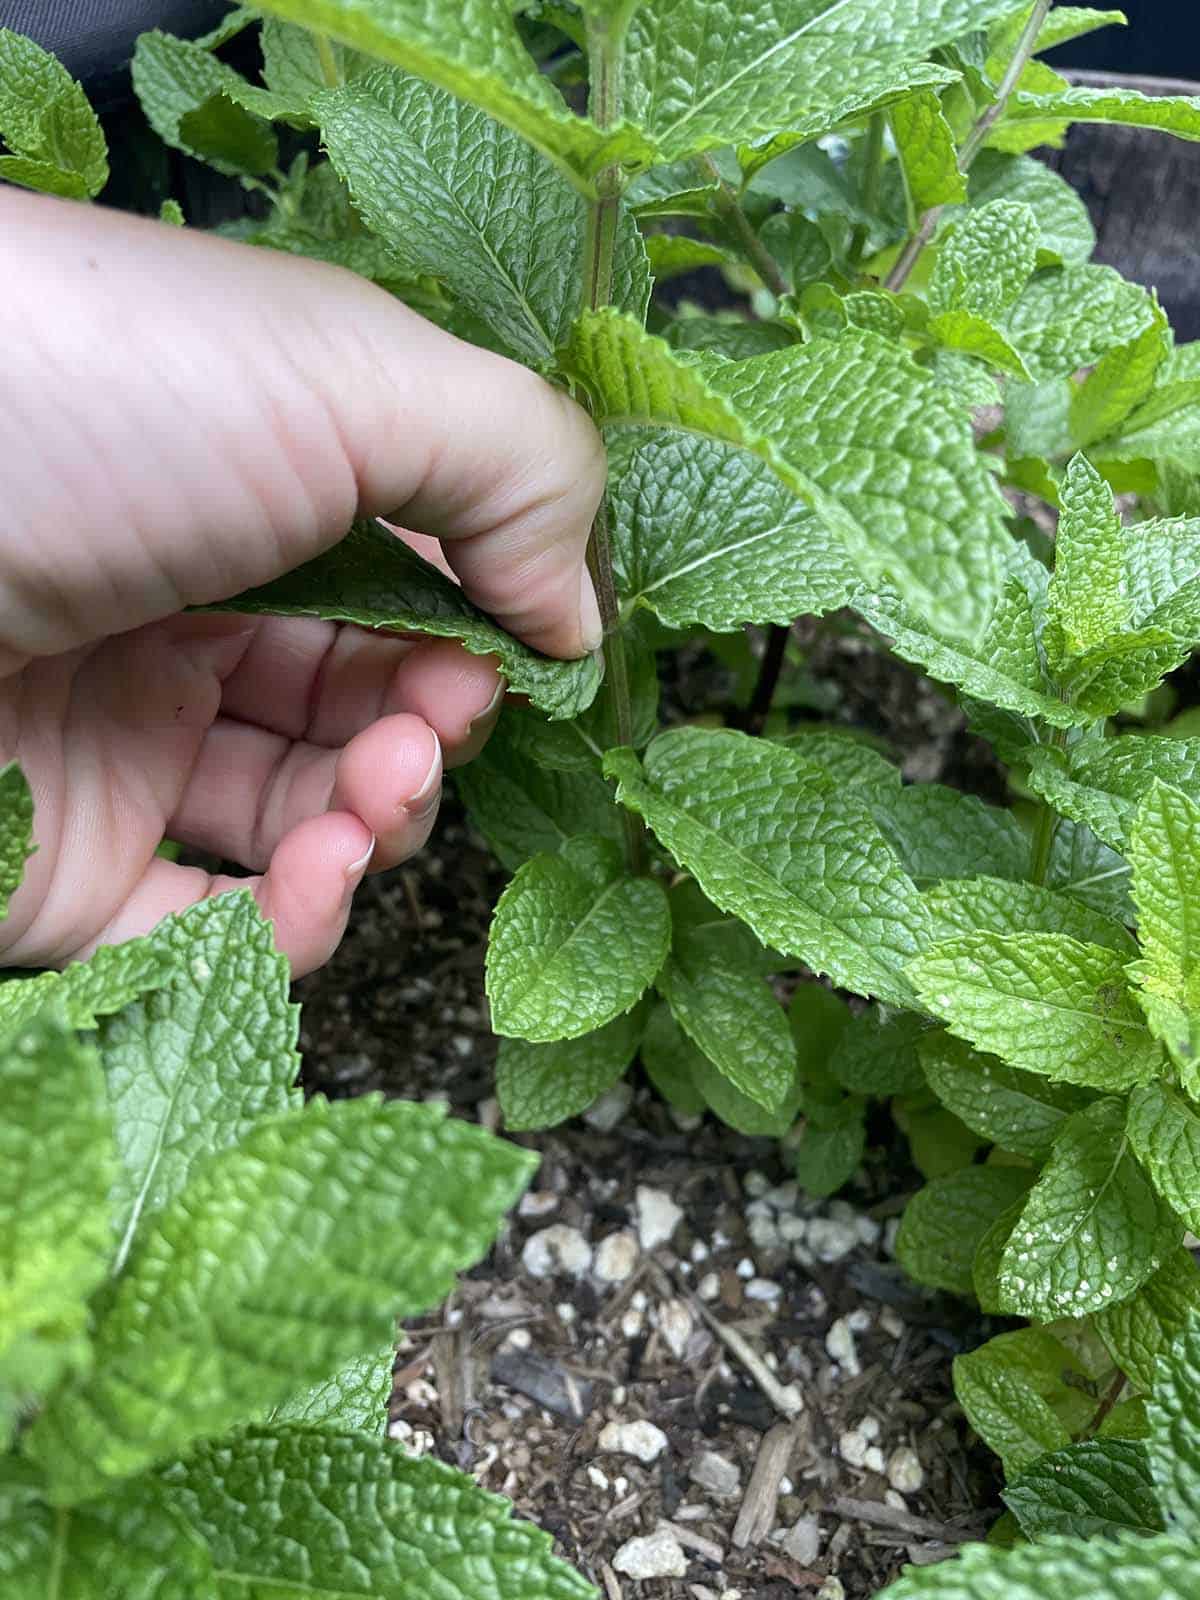 A hand pinching off a leaf from a mint plant.